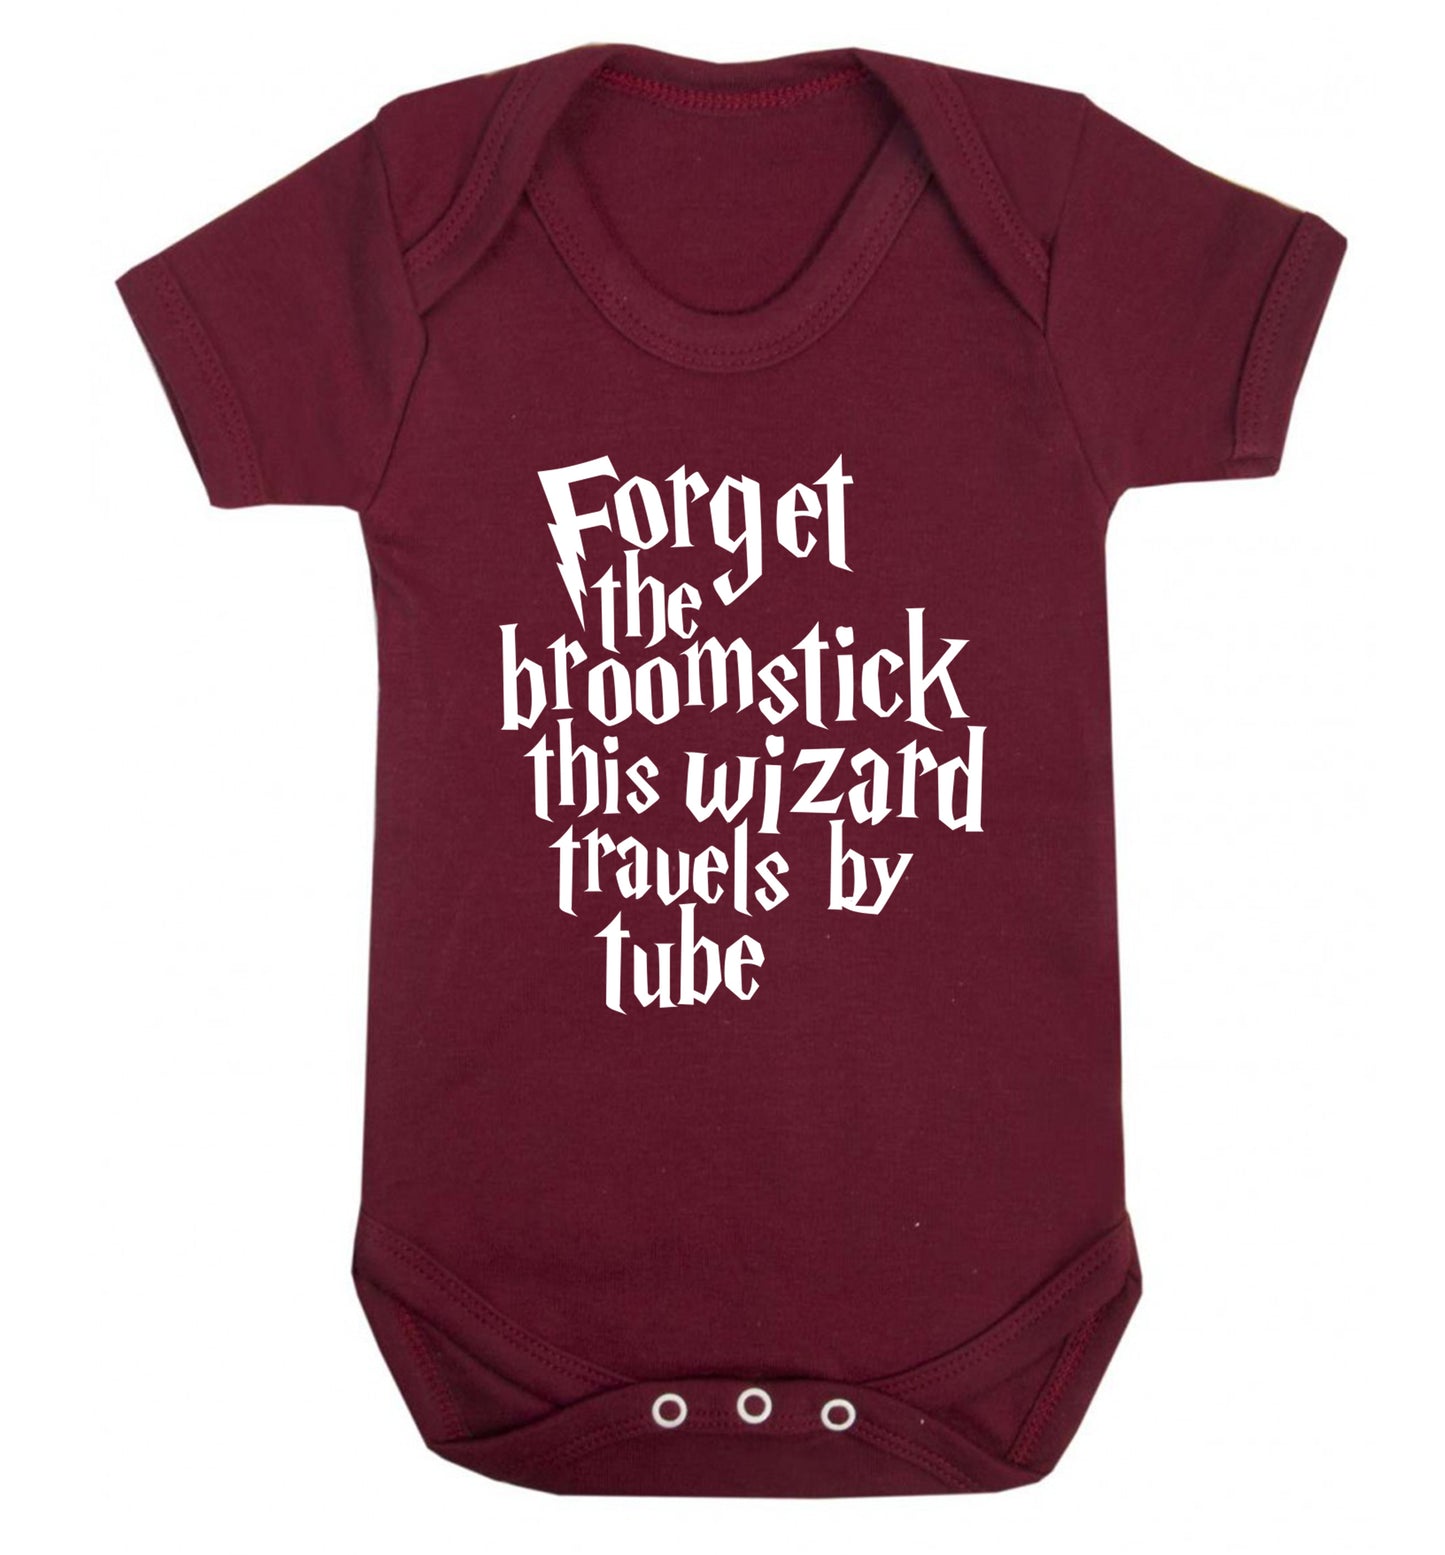 Forget the broomstick this wizard travels by tube Baby Vest maroon 18-24 months